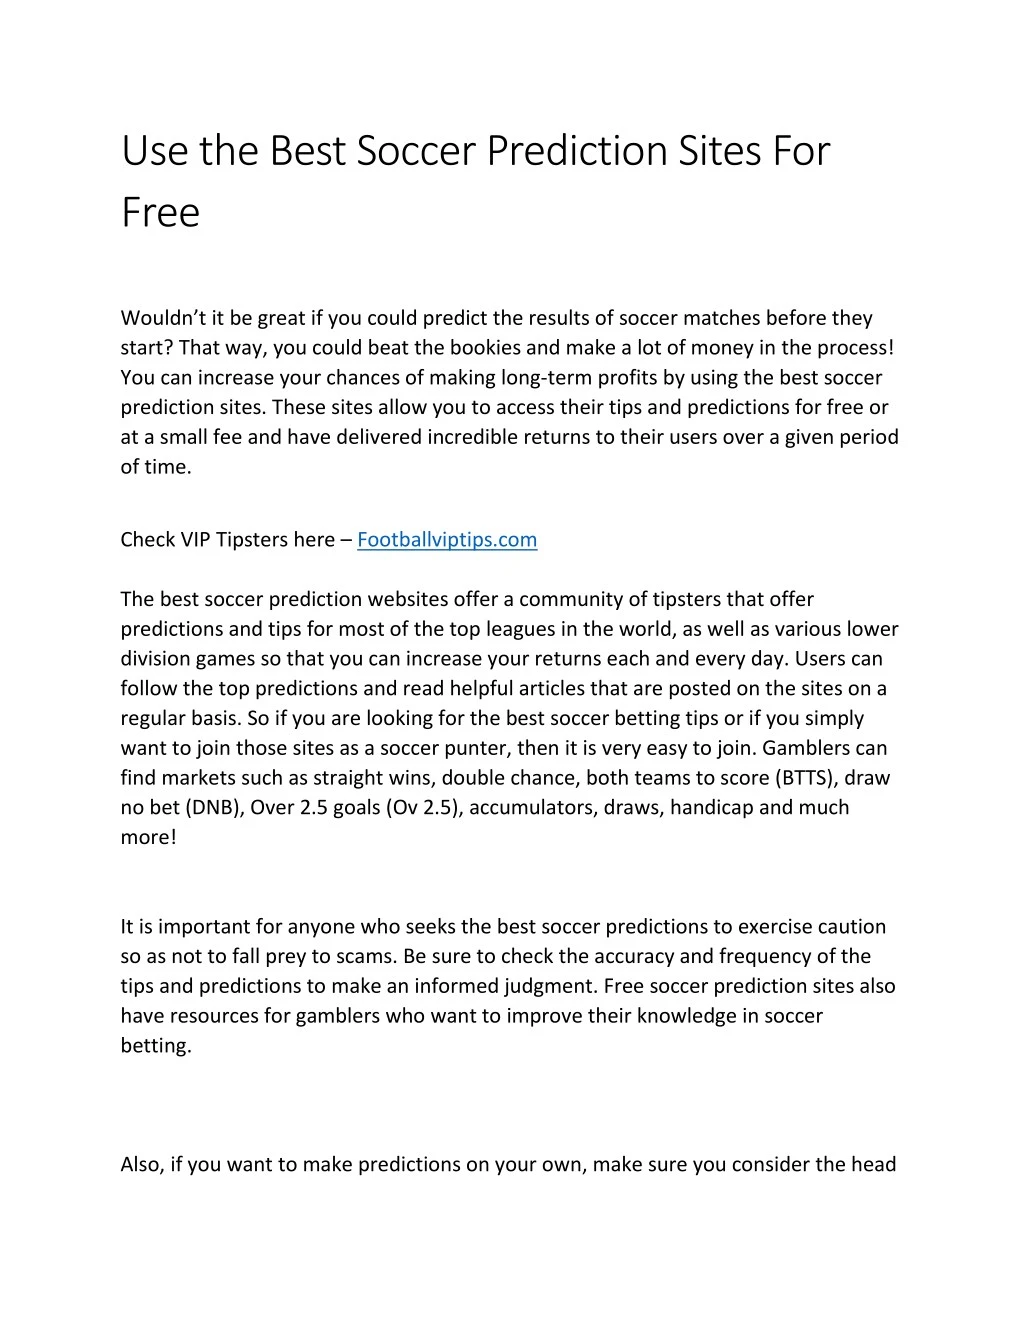 use the best soccer prediction sites for free